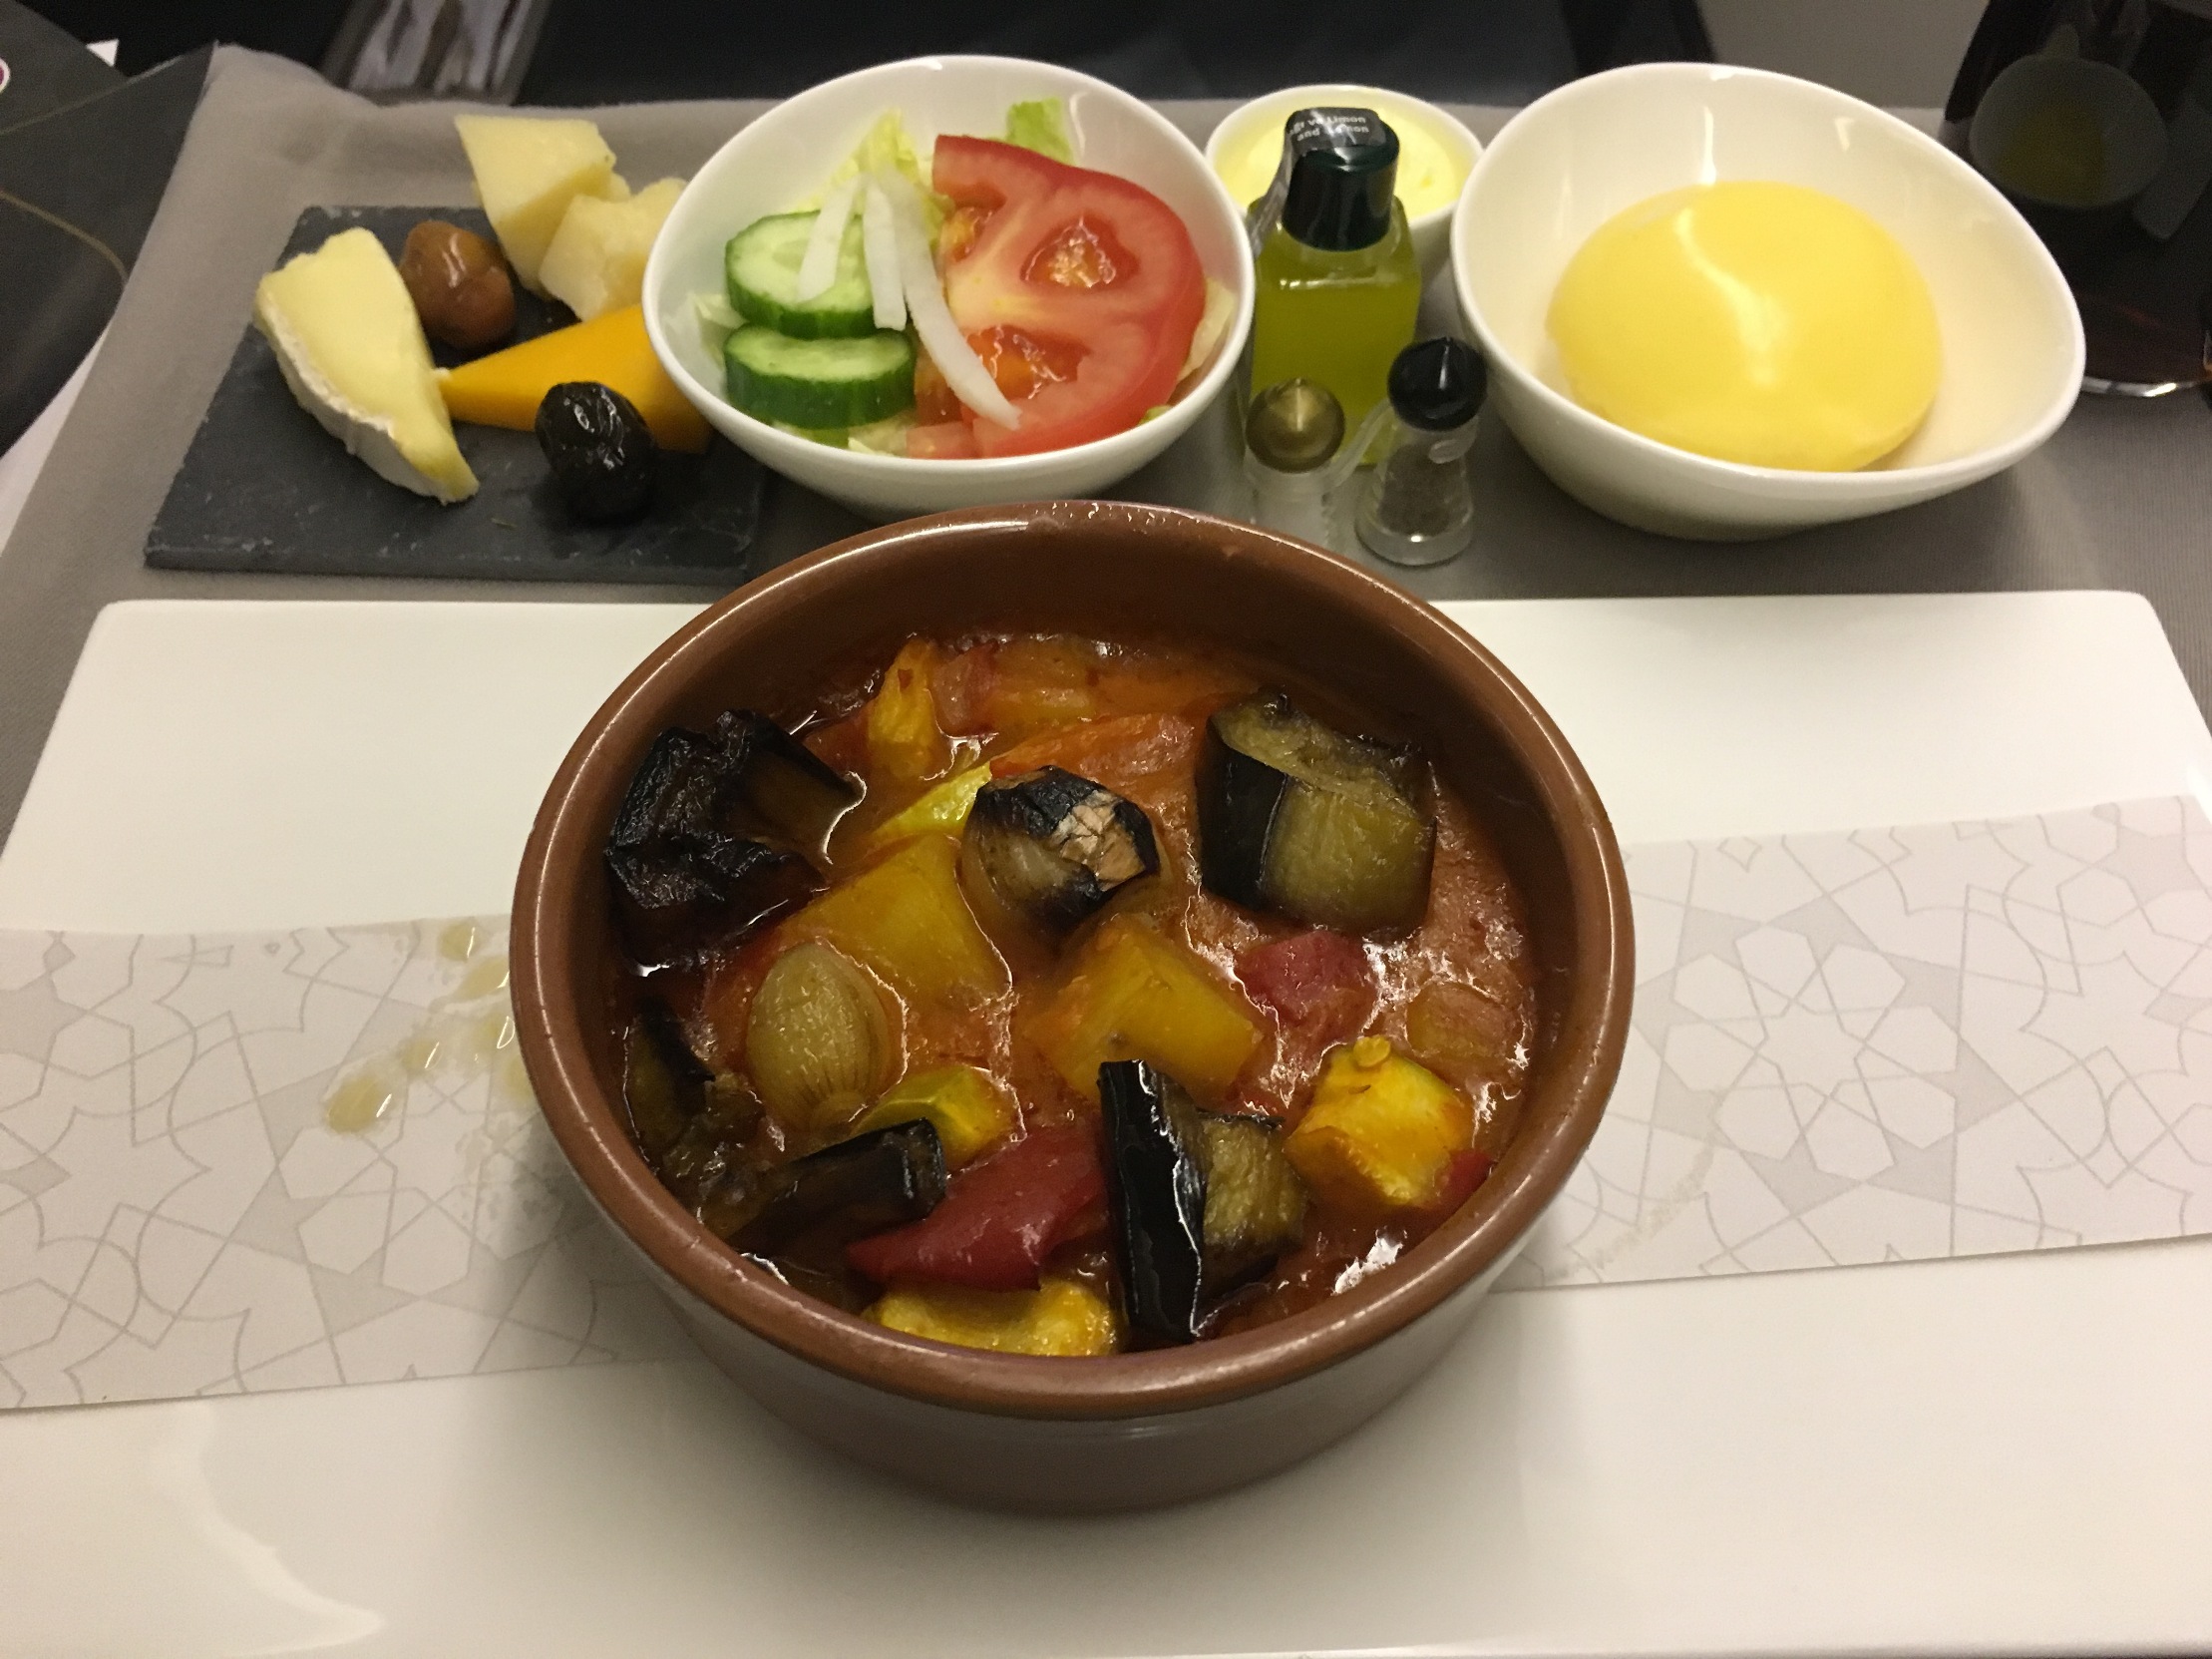 Turkish Airlines Inflight Meal (Istanbul-Tel Aviv)